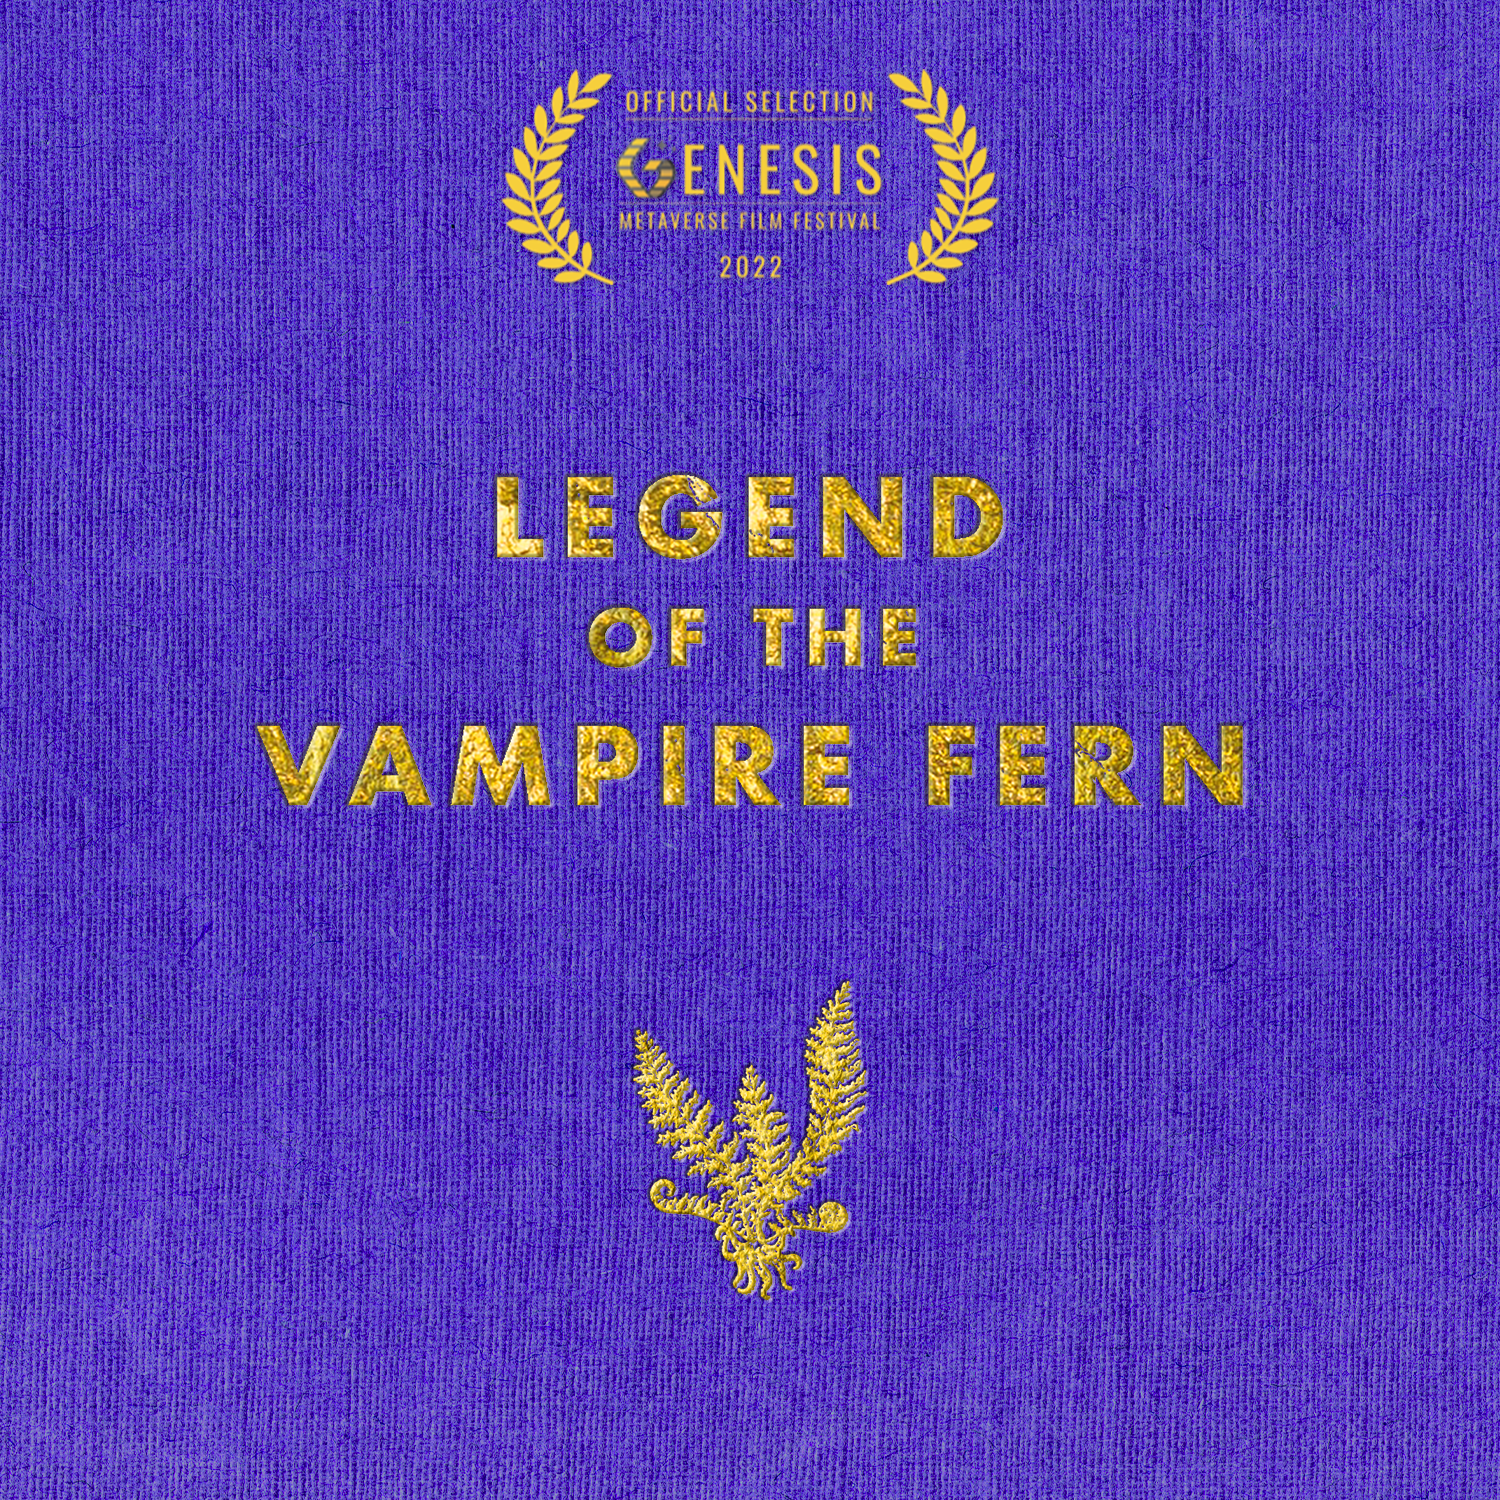 Image Description: Gold leaf lettering spells out "Legend of the Vampire Fern" on purple fabric. Above the text is a laurel for the 2022 GENESIS Metaverse Film Festival. Below the text is a fern in gold leaf with tentacles for roots.